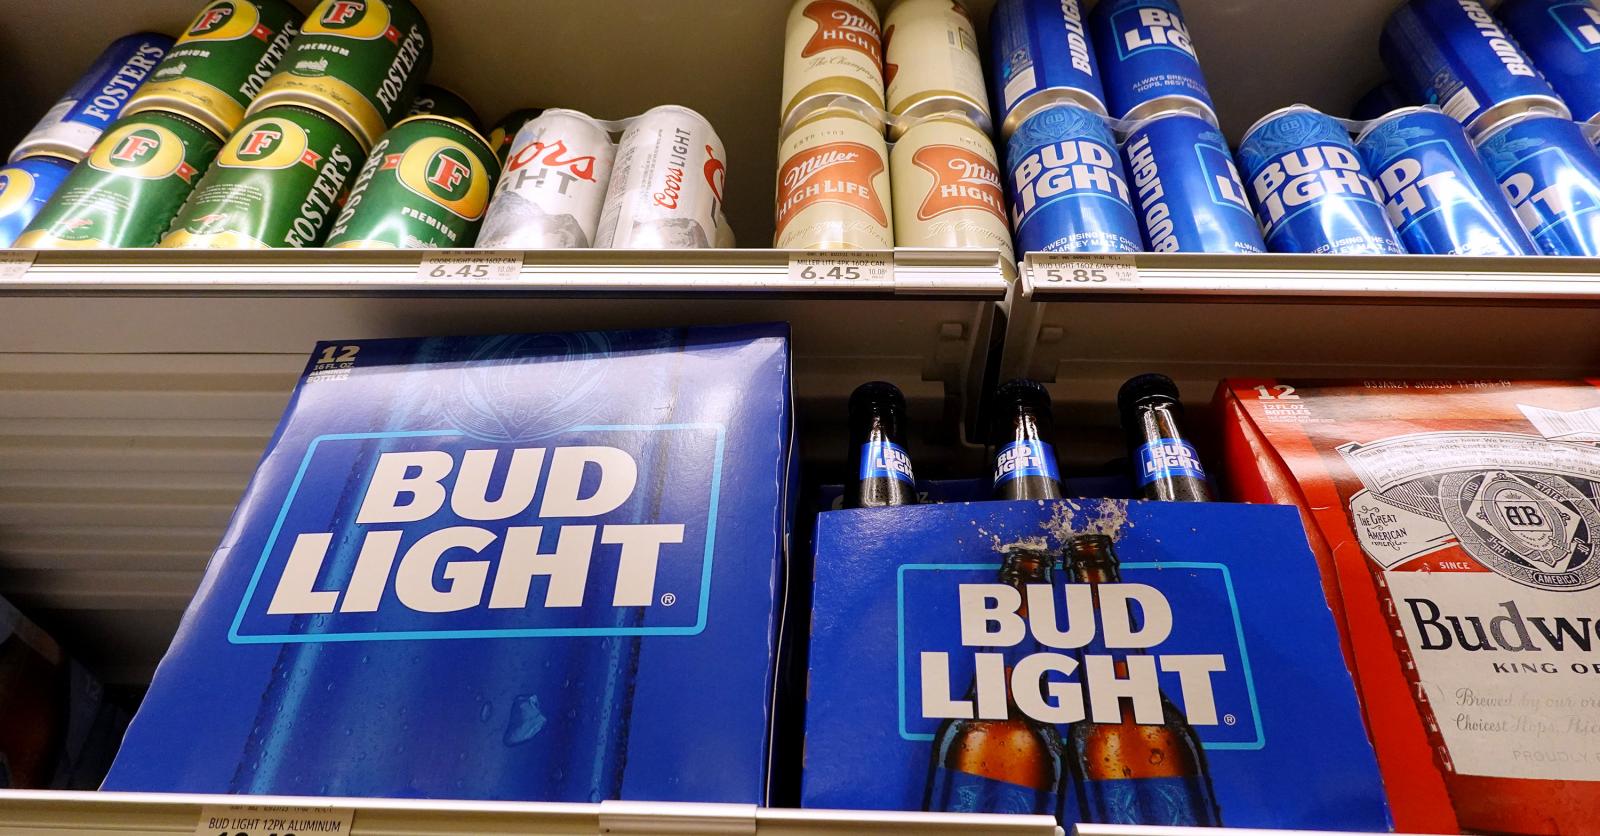 The Mexican lager dethroned Bud Light as market leader in the US